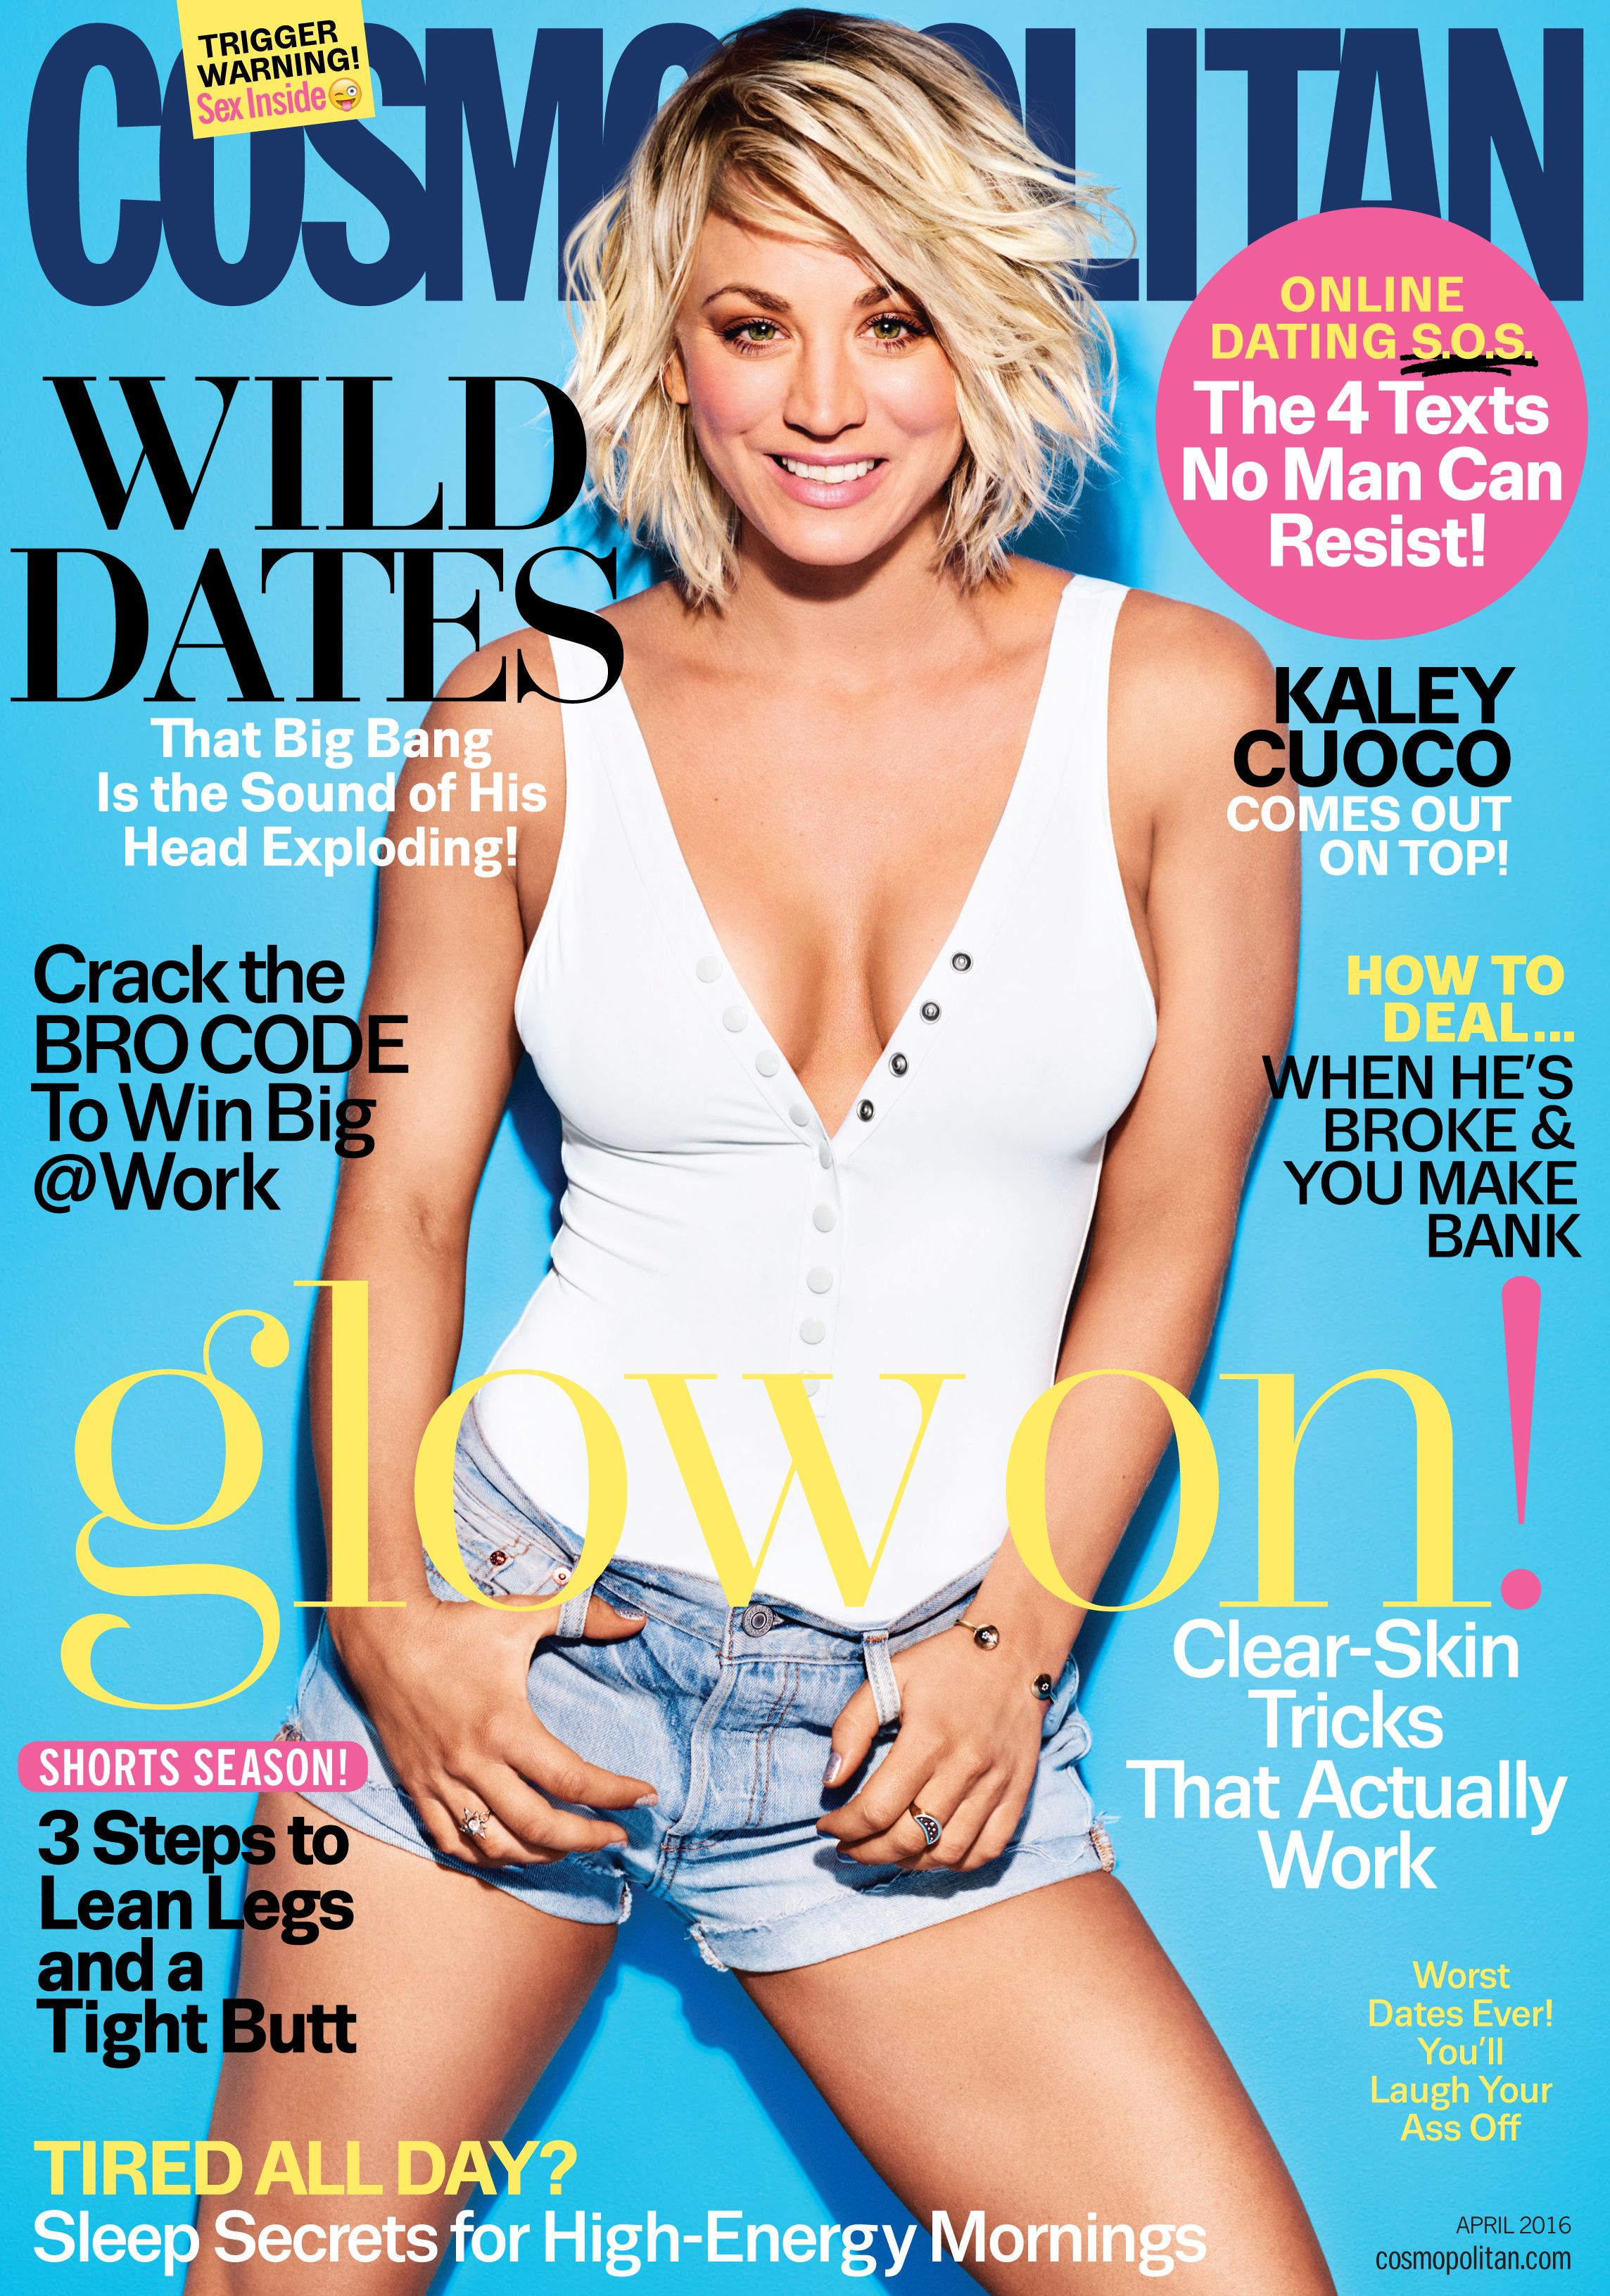 andy mayhew recommends kaley cuoco sex pictures pic